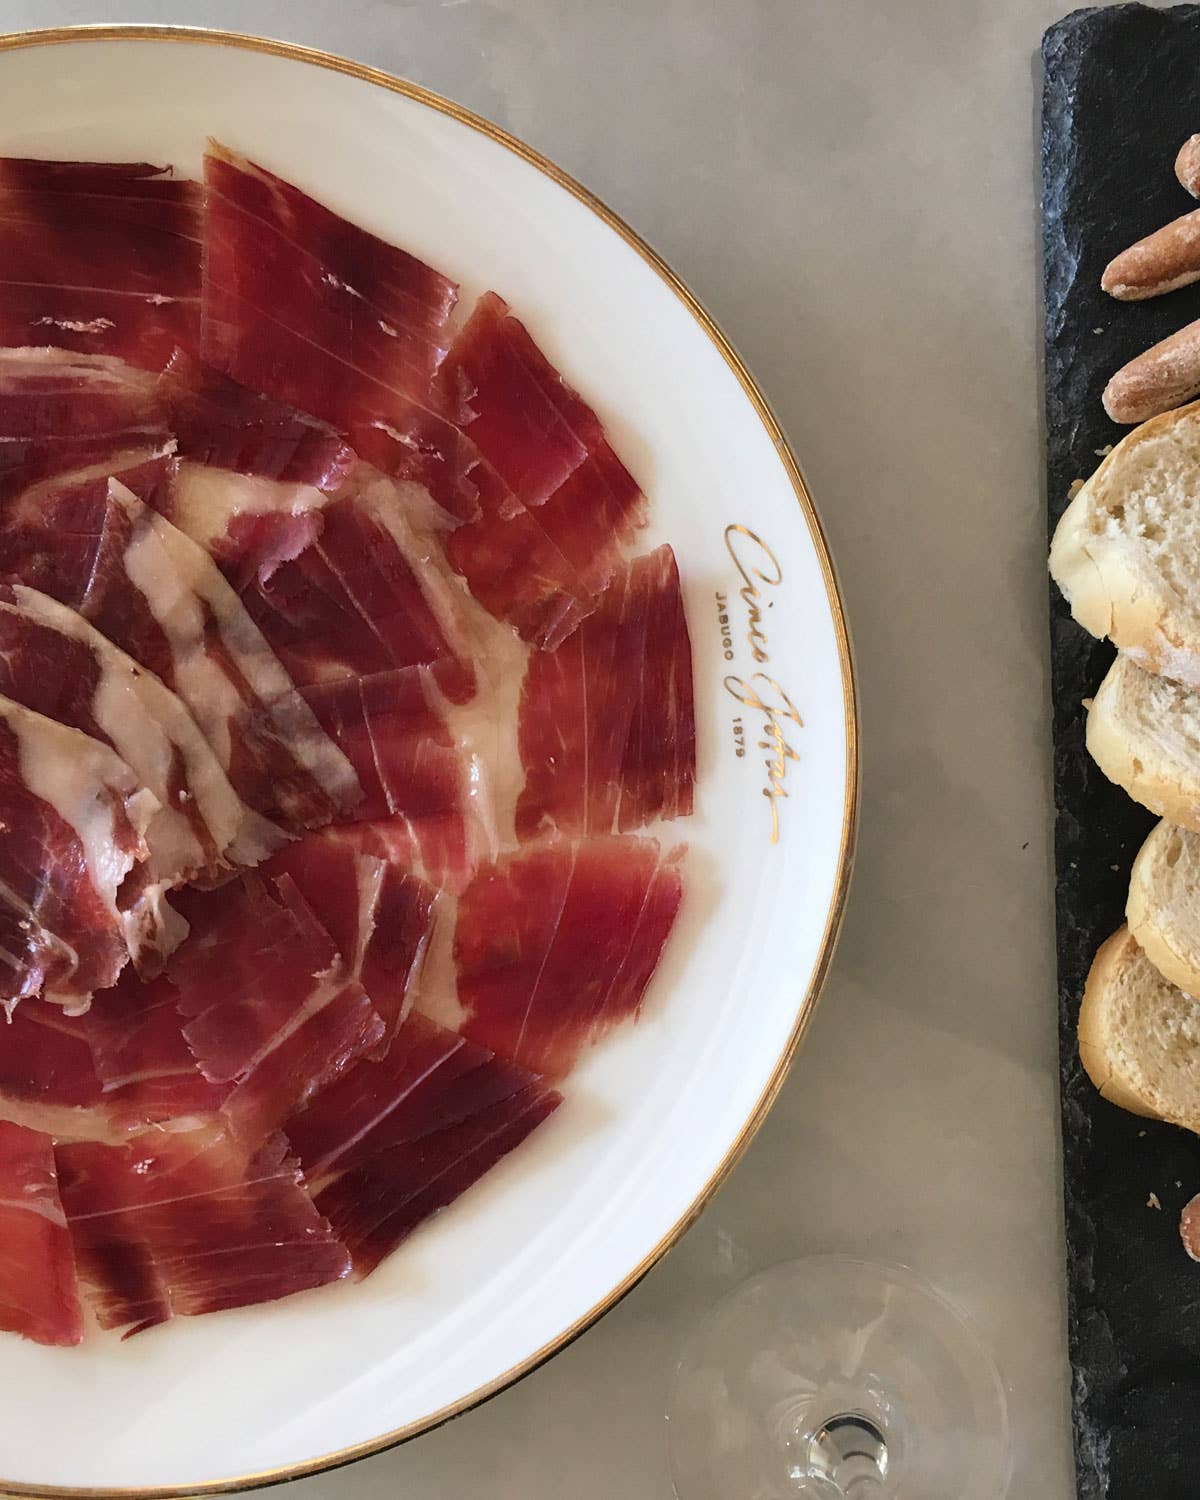 Travel Through These 15 Cities to Eat the Best Tapas in Spain